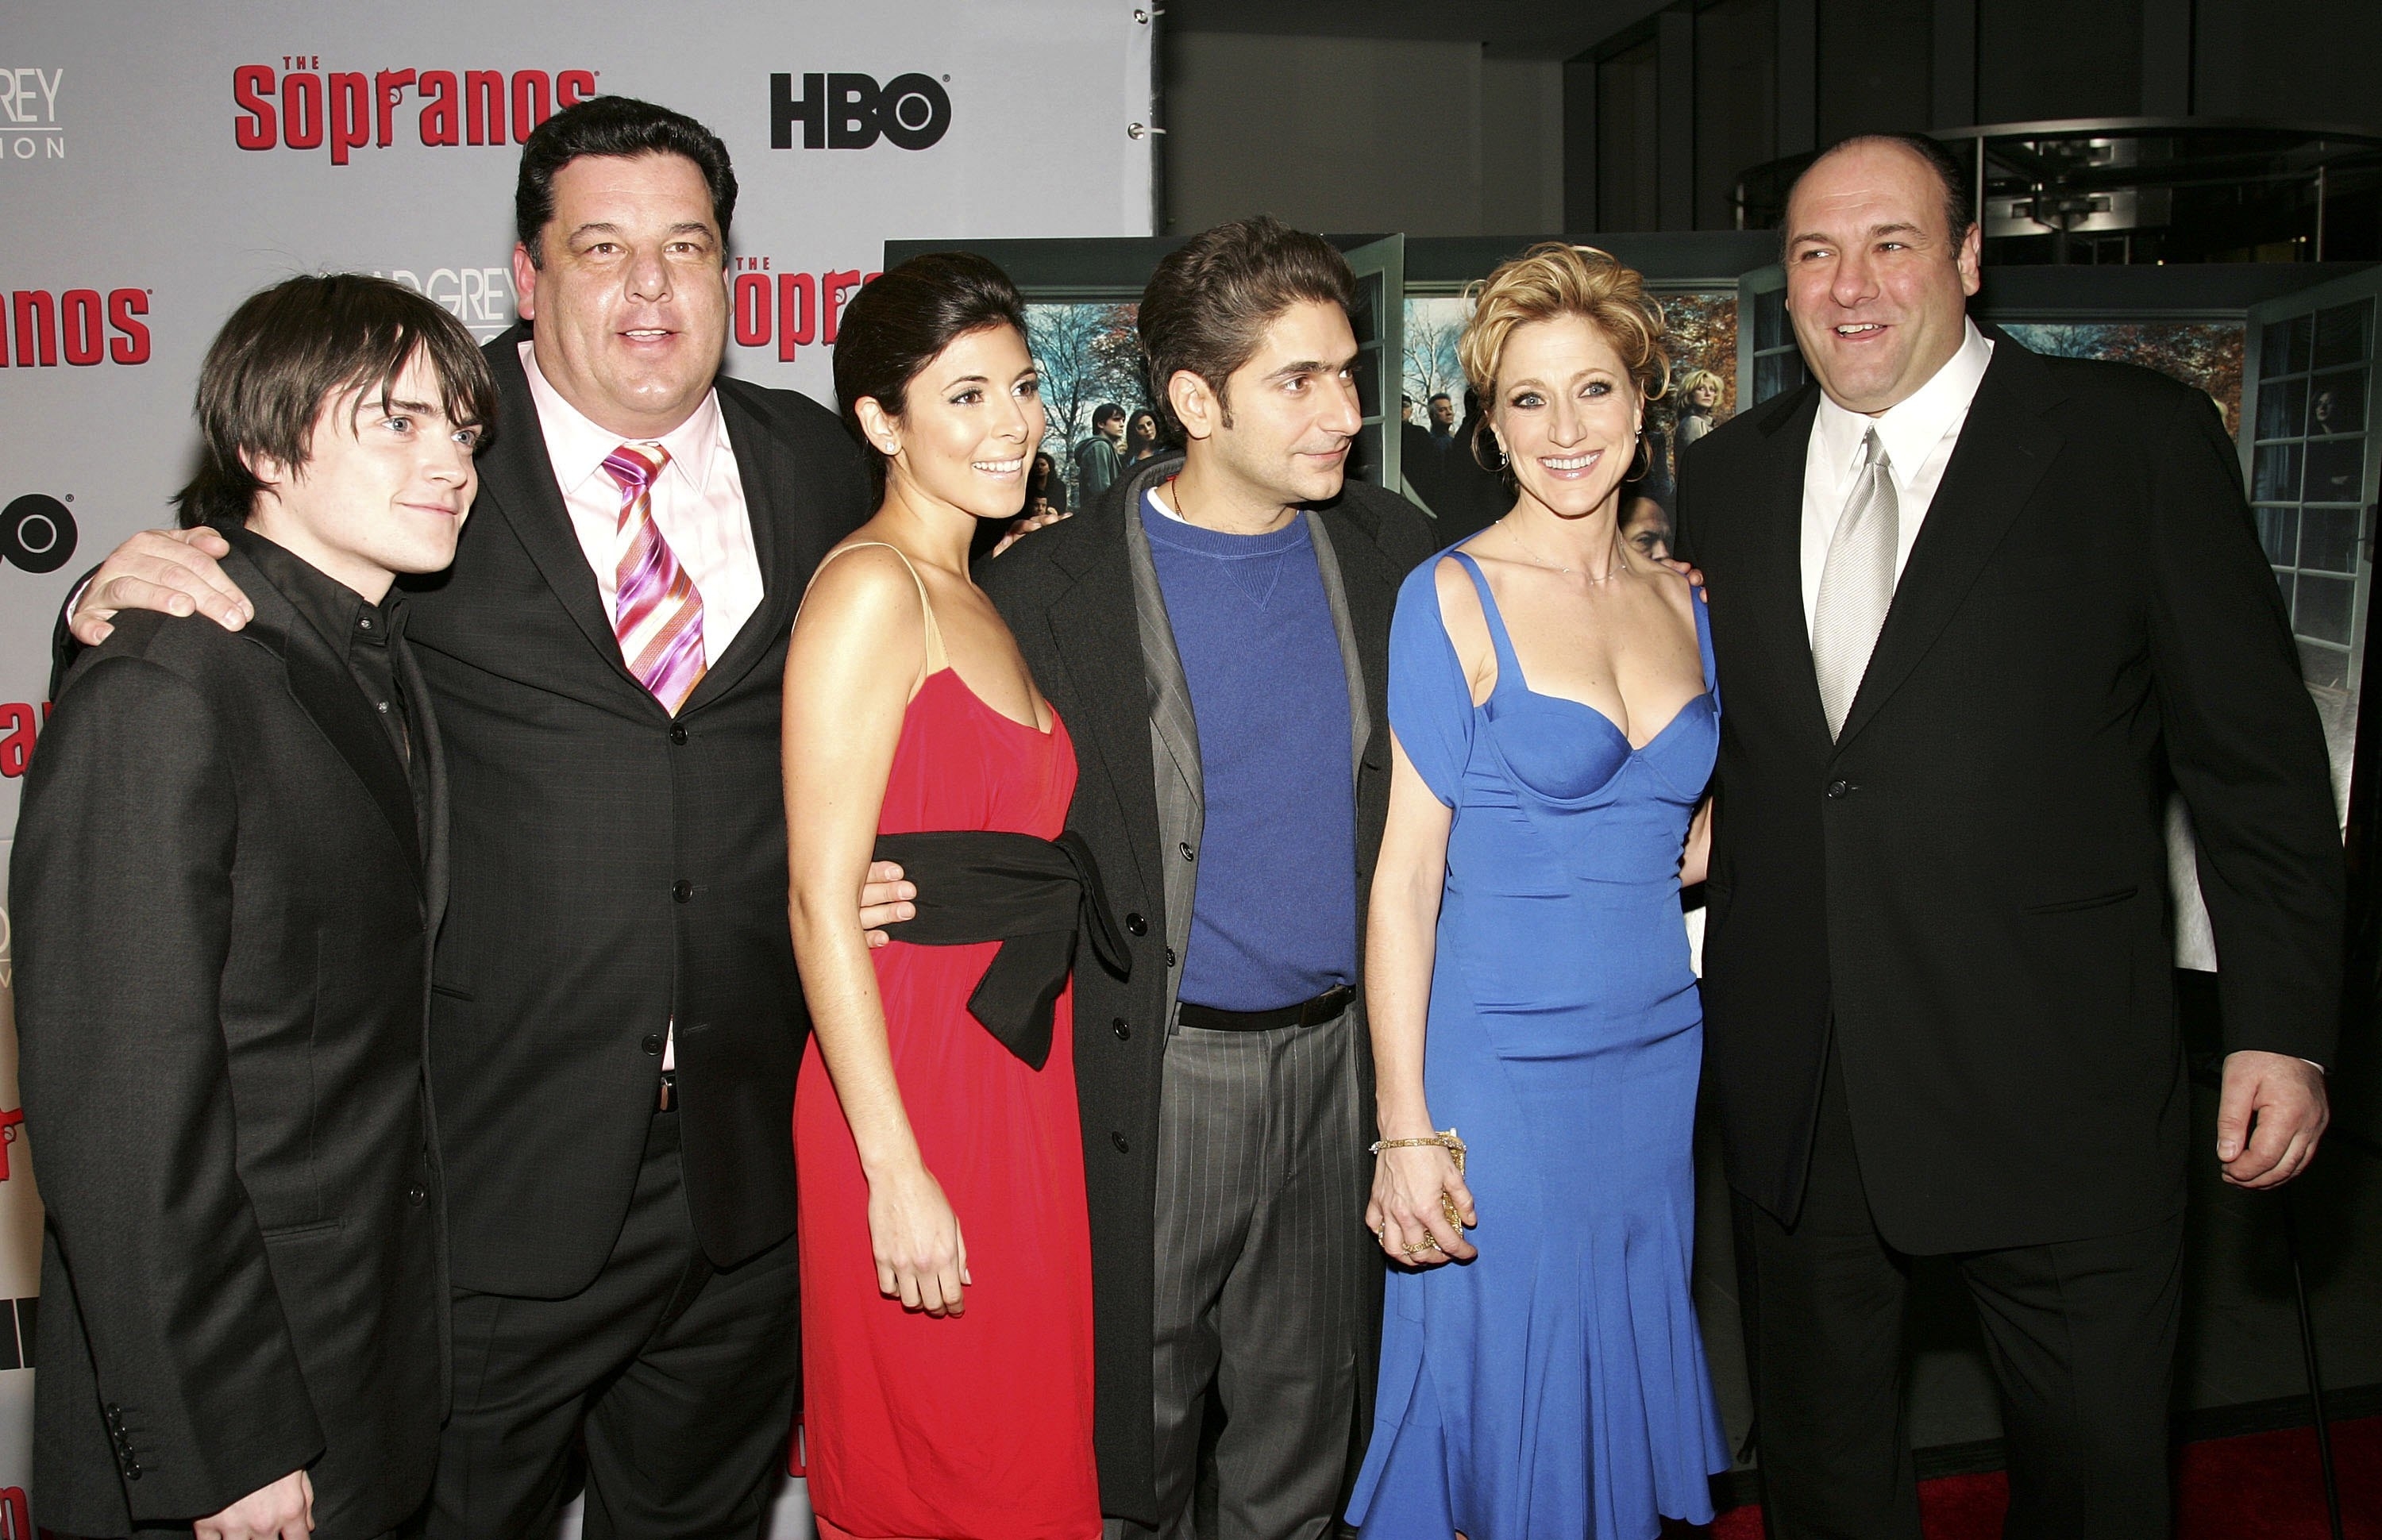 The cast of &quot;The Sopranos&quot;